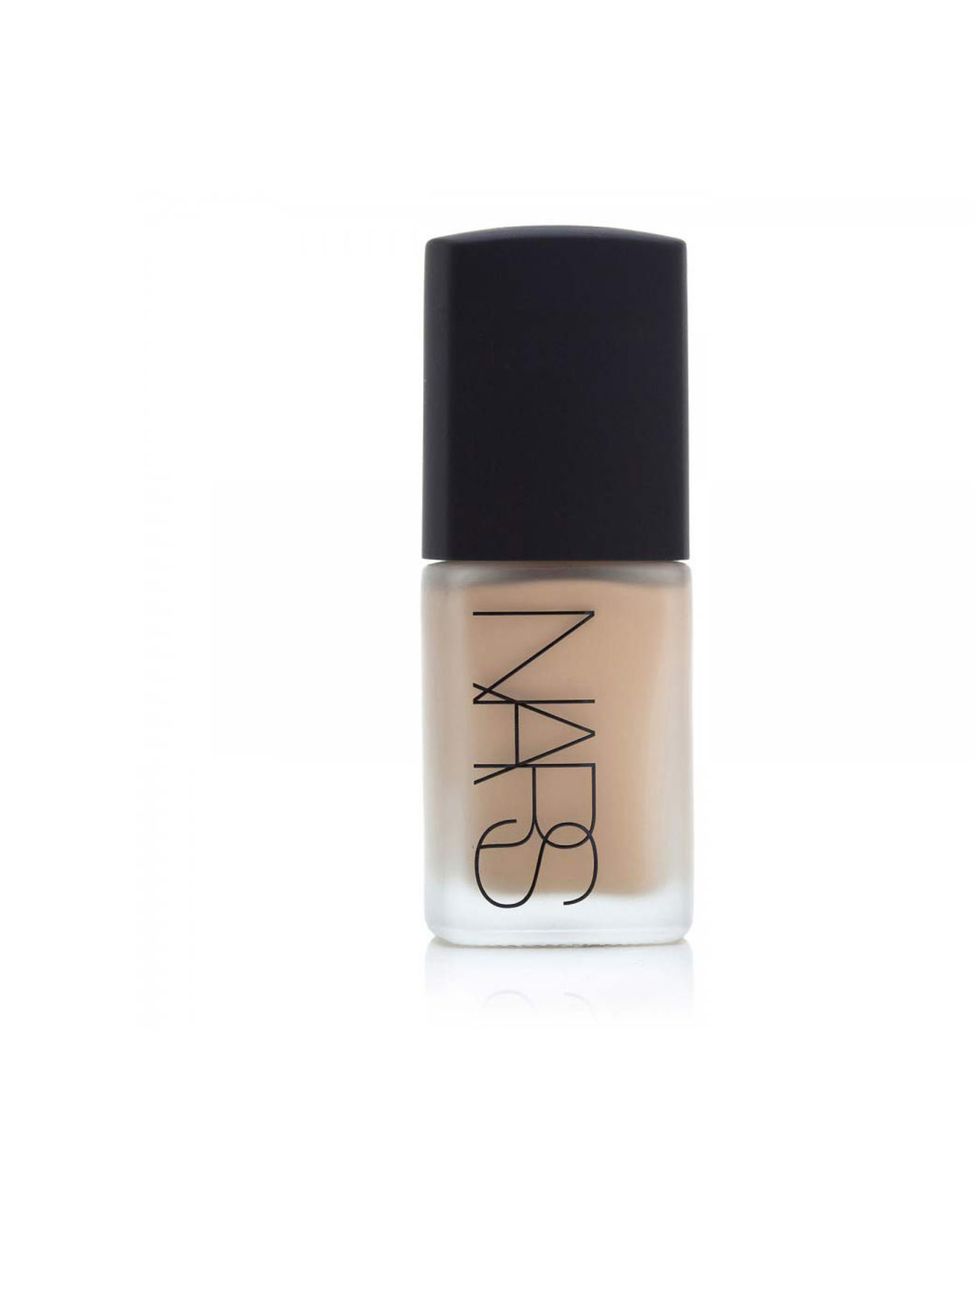 <p><a href="http://www.narscosmetics.co.uk/complexion/foundation/~/sheer-matte-foundation">Nars Sheer Matte Foundation, £30.50</a></p><p>Matte foundation is always camera friendly. This oil-free, super light foundation by Nars is buildable so you can crea